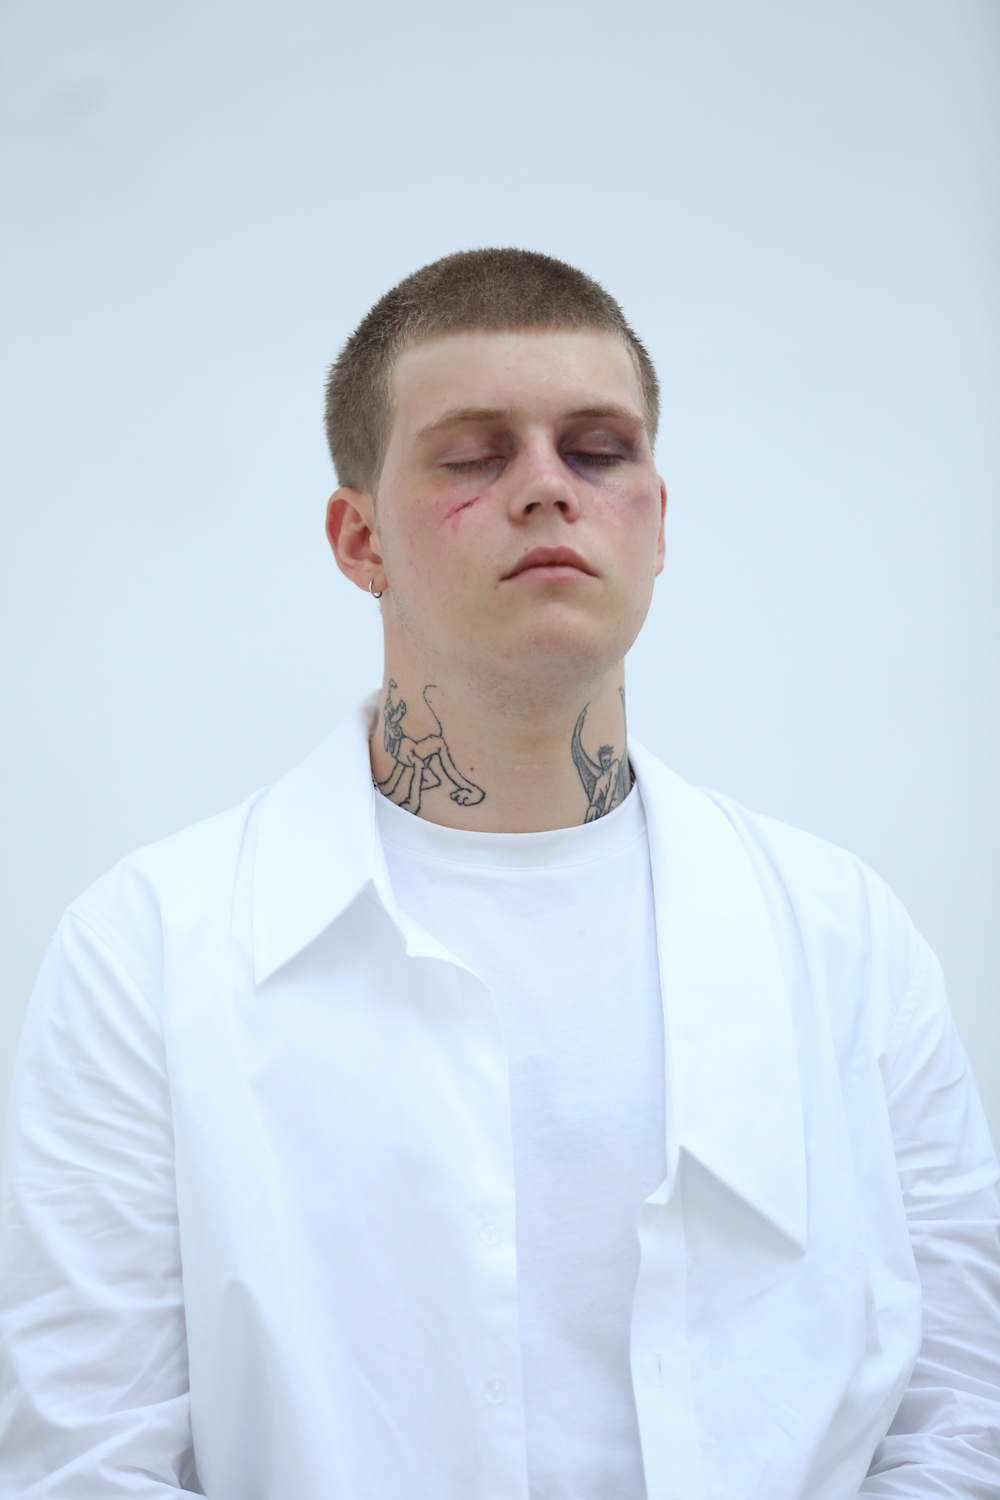 Yung Lean Gives Us A Look Into His Life On Tour In China Interview